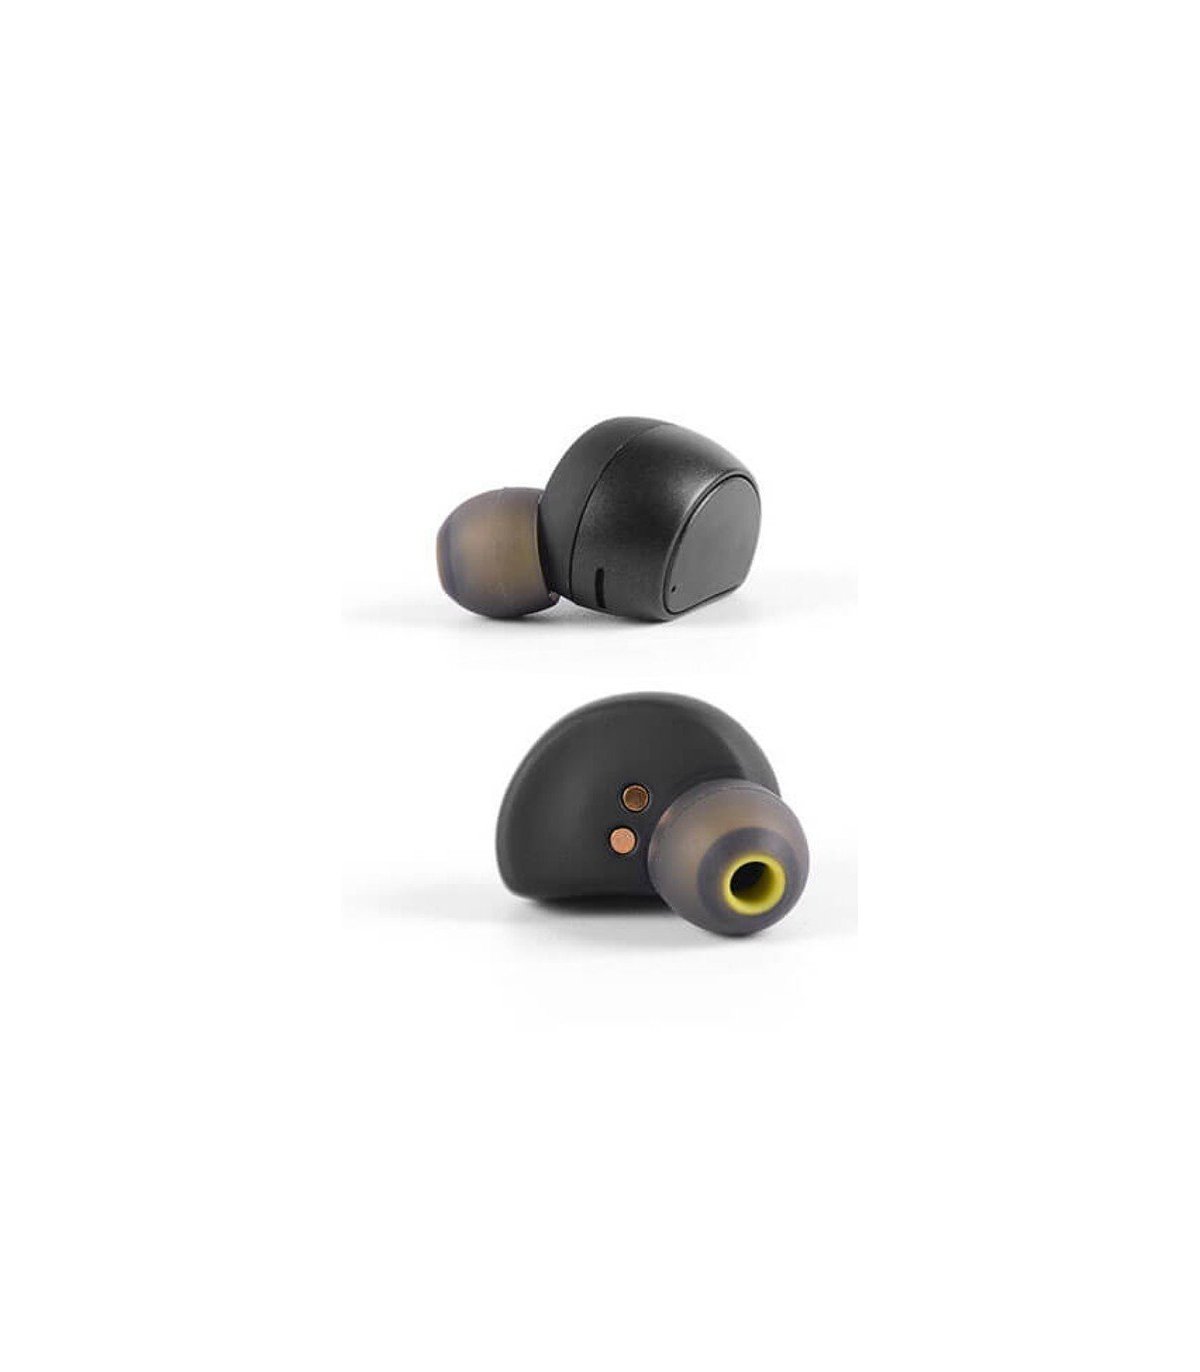 Chill TWS True Wireless Stereo Bluetooth Earphones with chargebox, Black